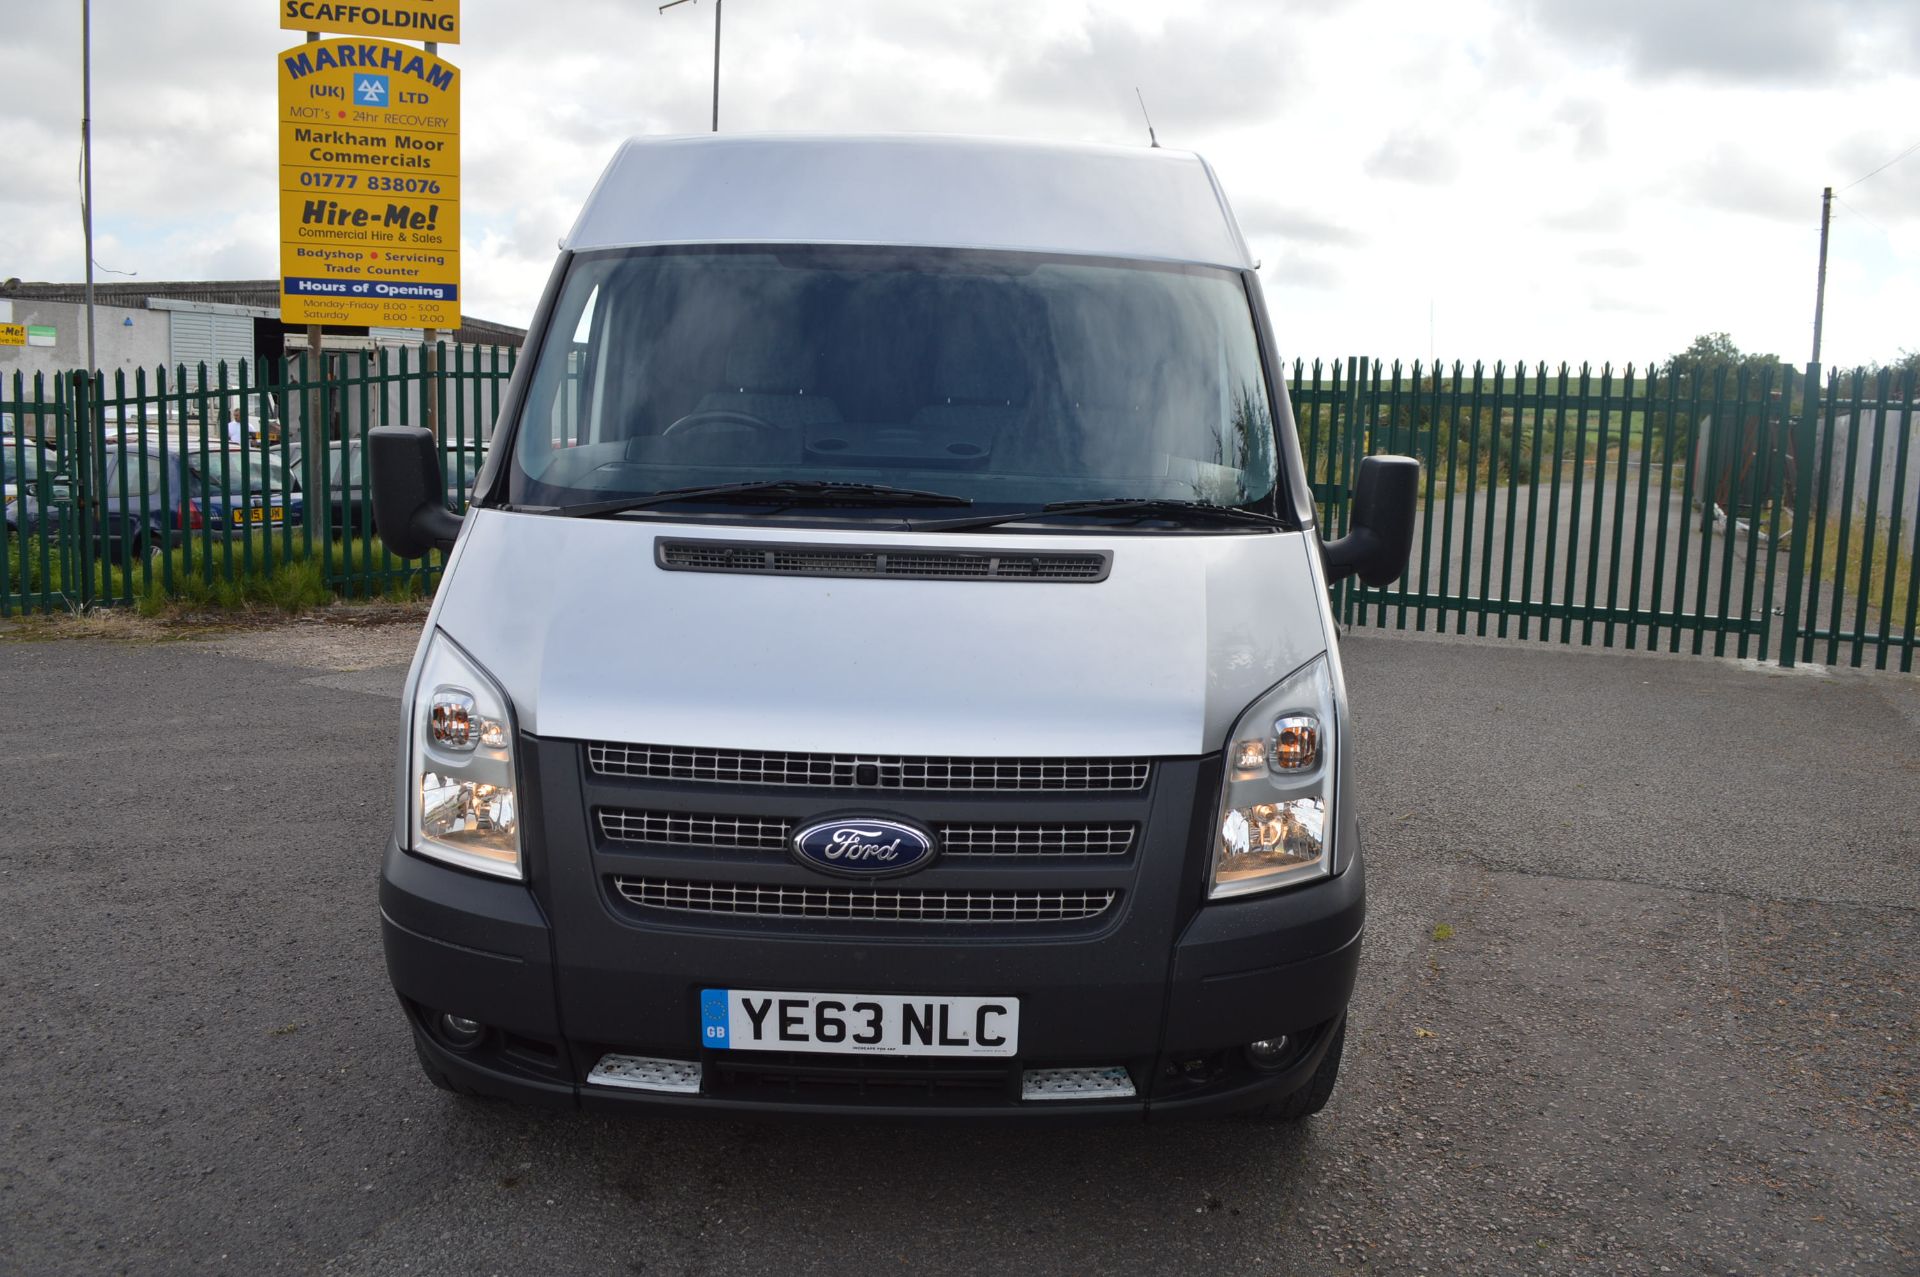 2013/63 REG FORD TRANSIT 125 T330 FWD - 1 OWNER FROM NEW, AIR CON, HEATED WINDSCREEN! *NO VAT* - Image 2 of 25